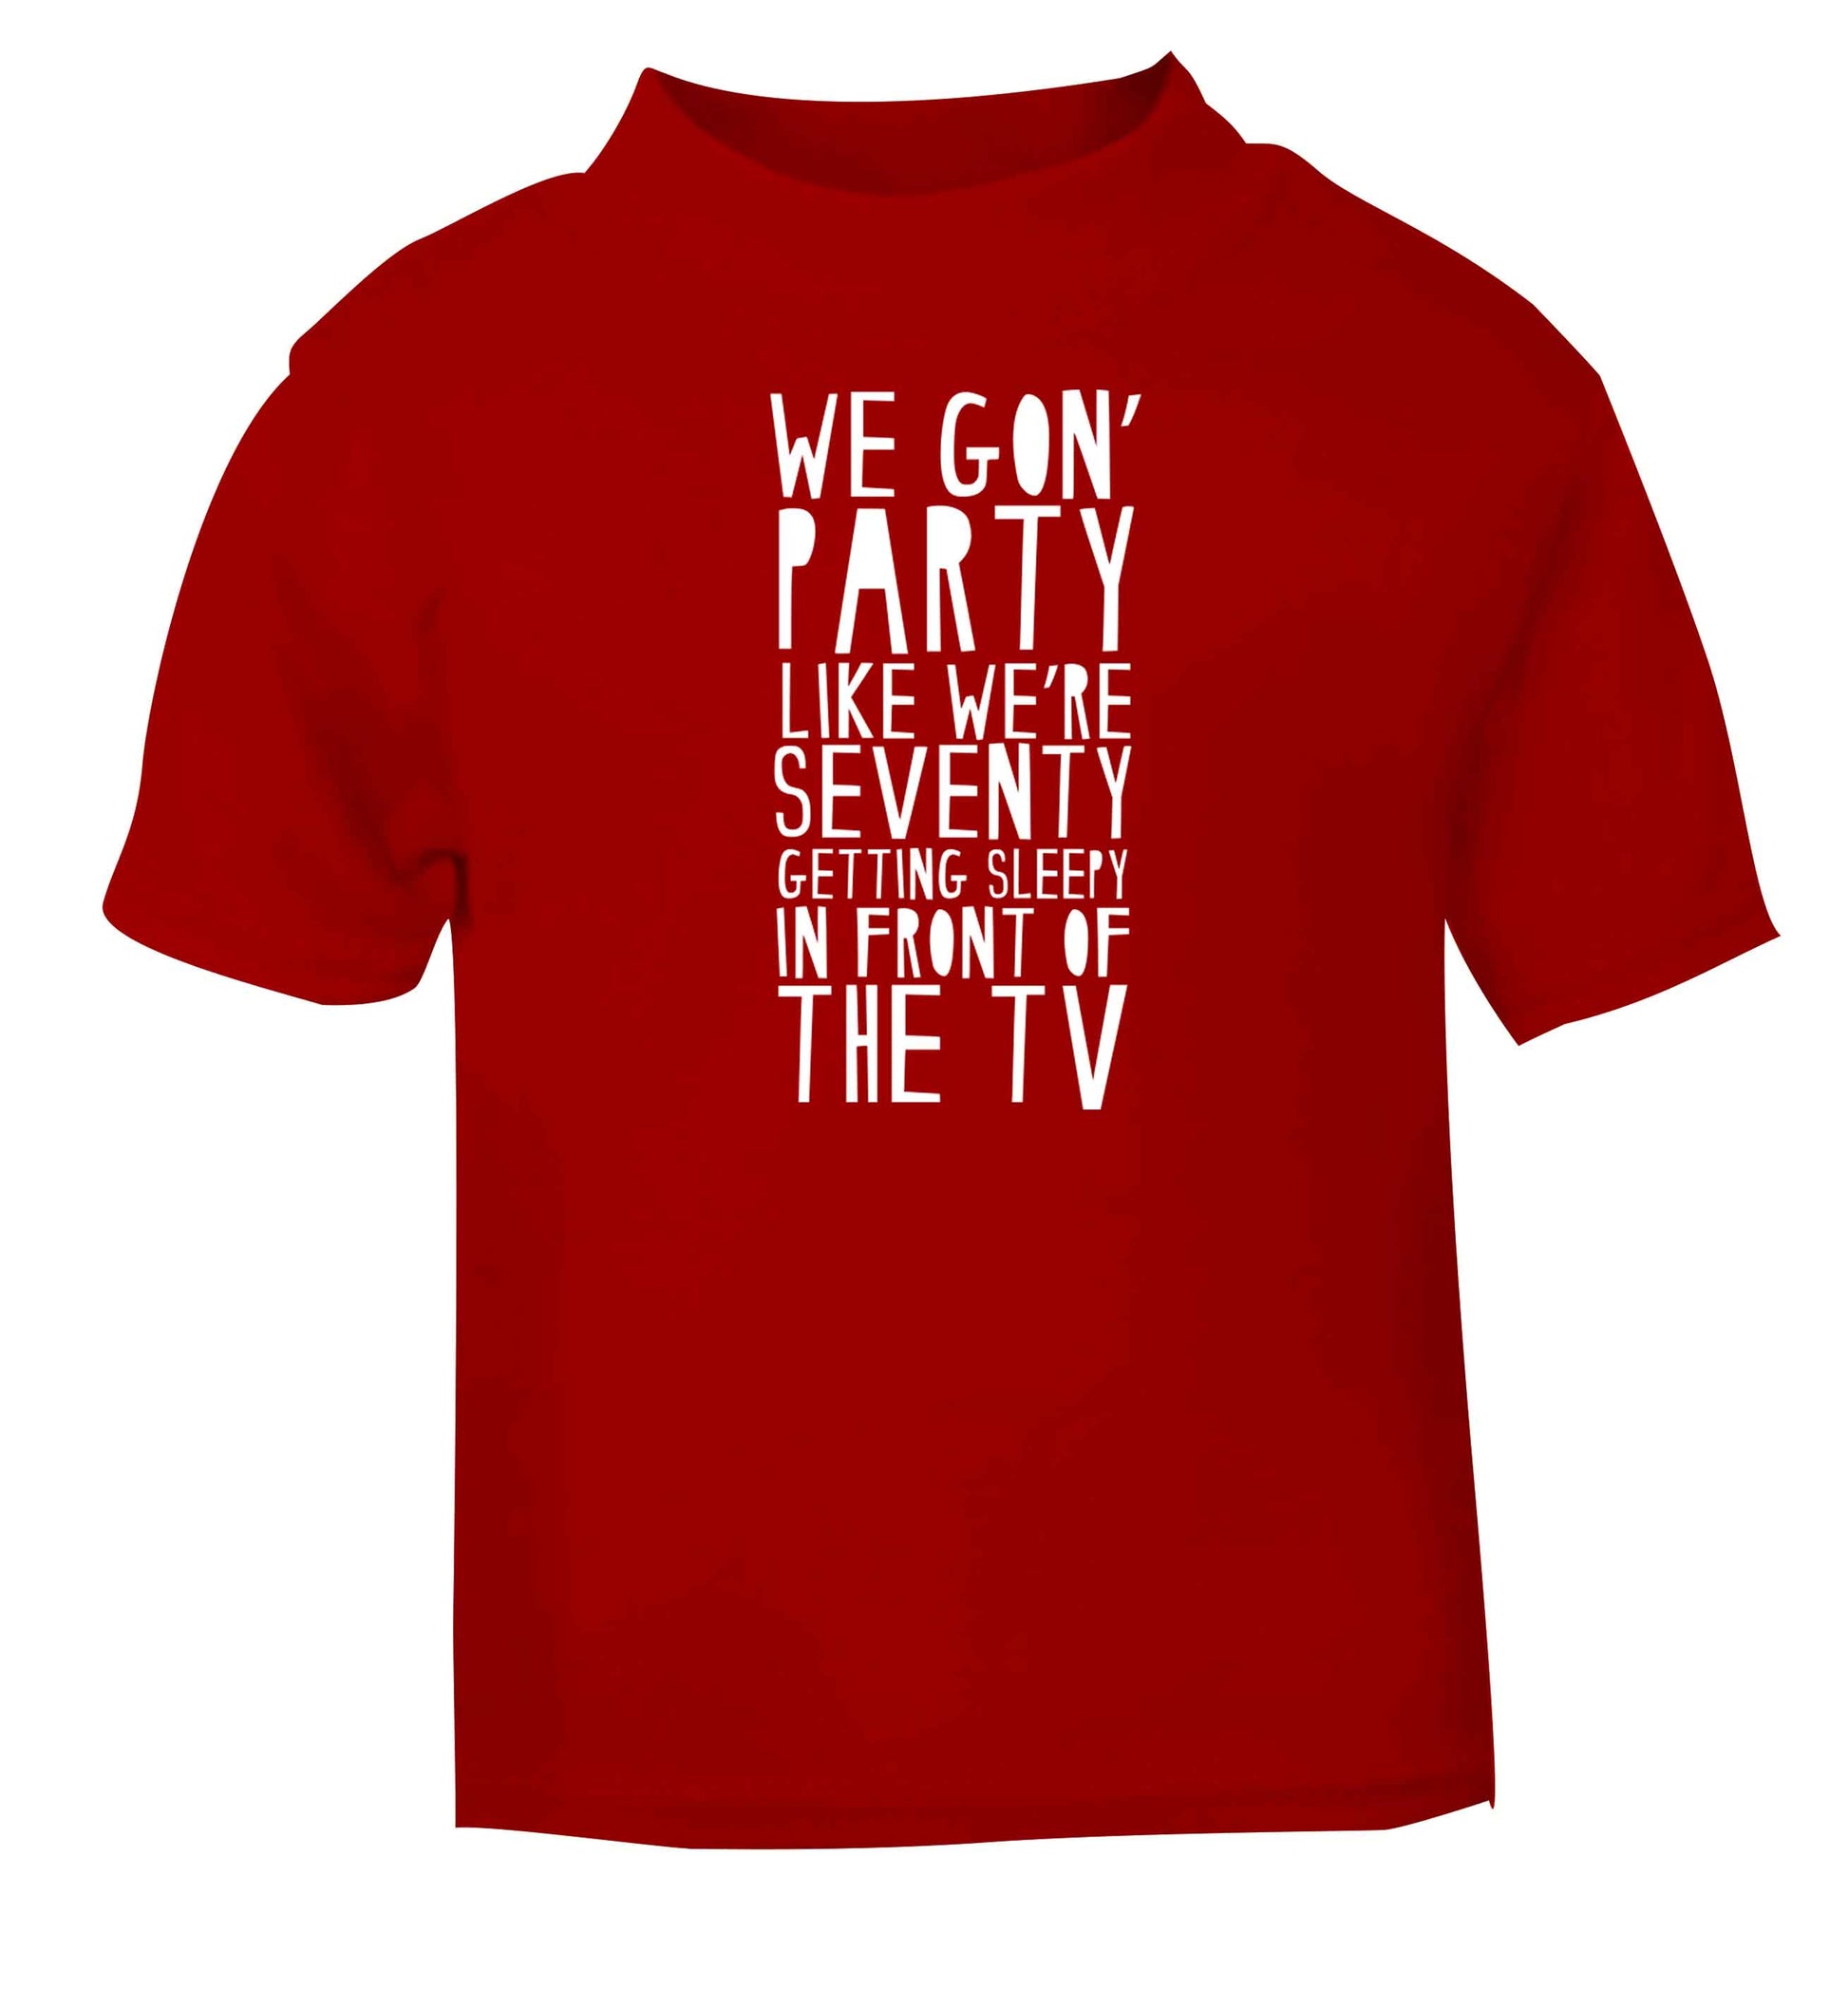 We gon' party like we're seventy getting sleepy in front of the TV red baby toddler Tshirt 2 Years